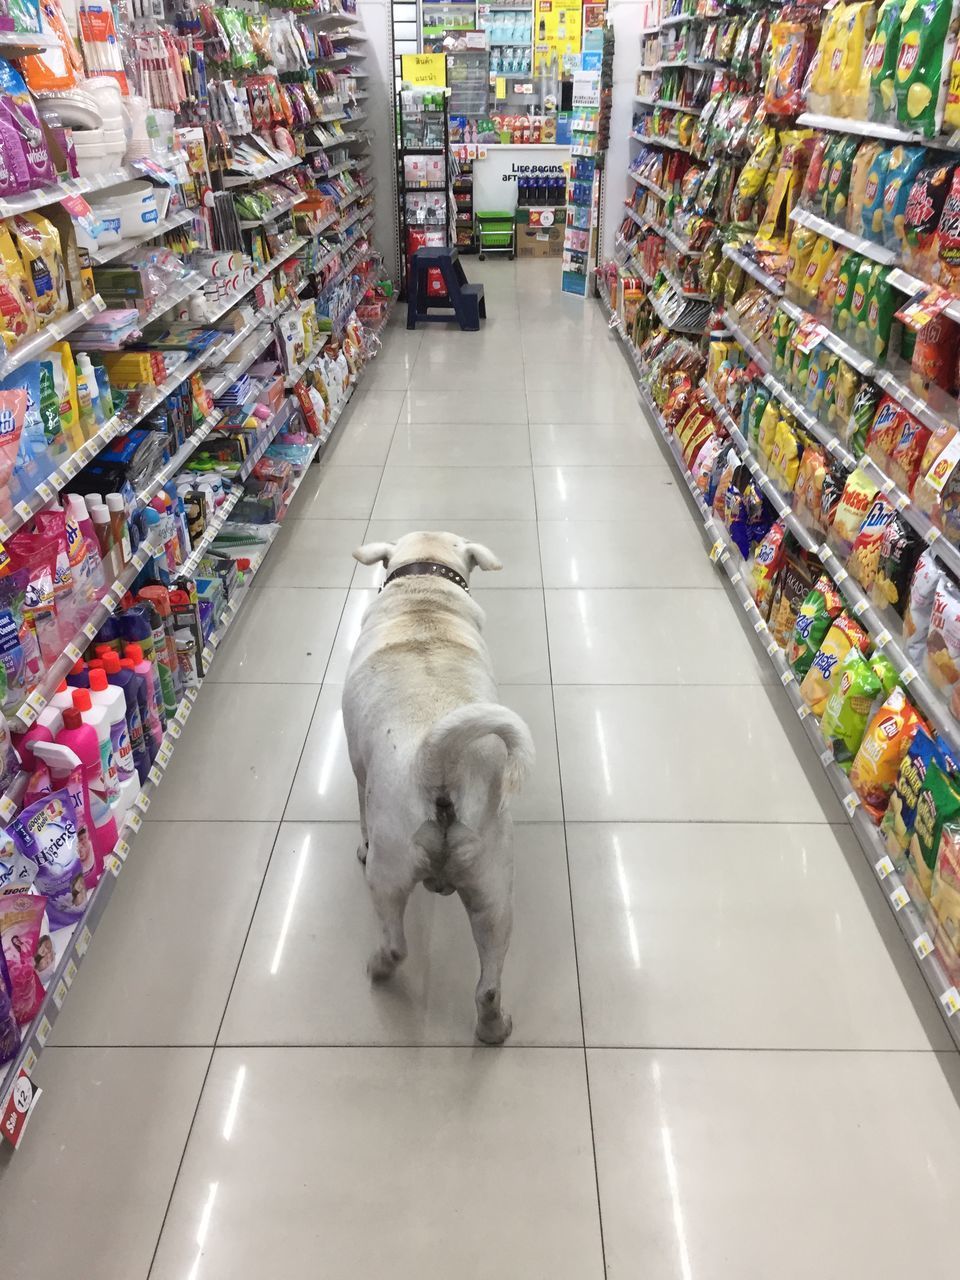 VIEW OF A DOG IN STORE